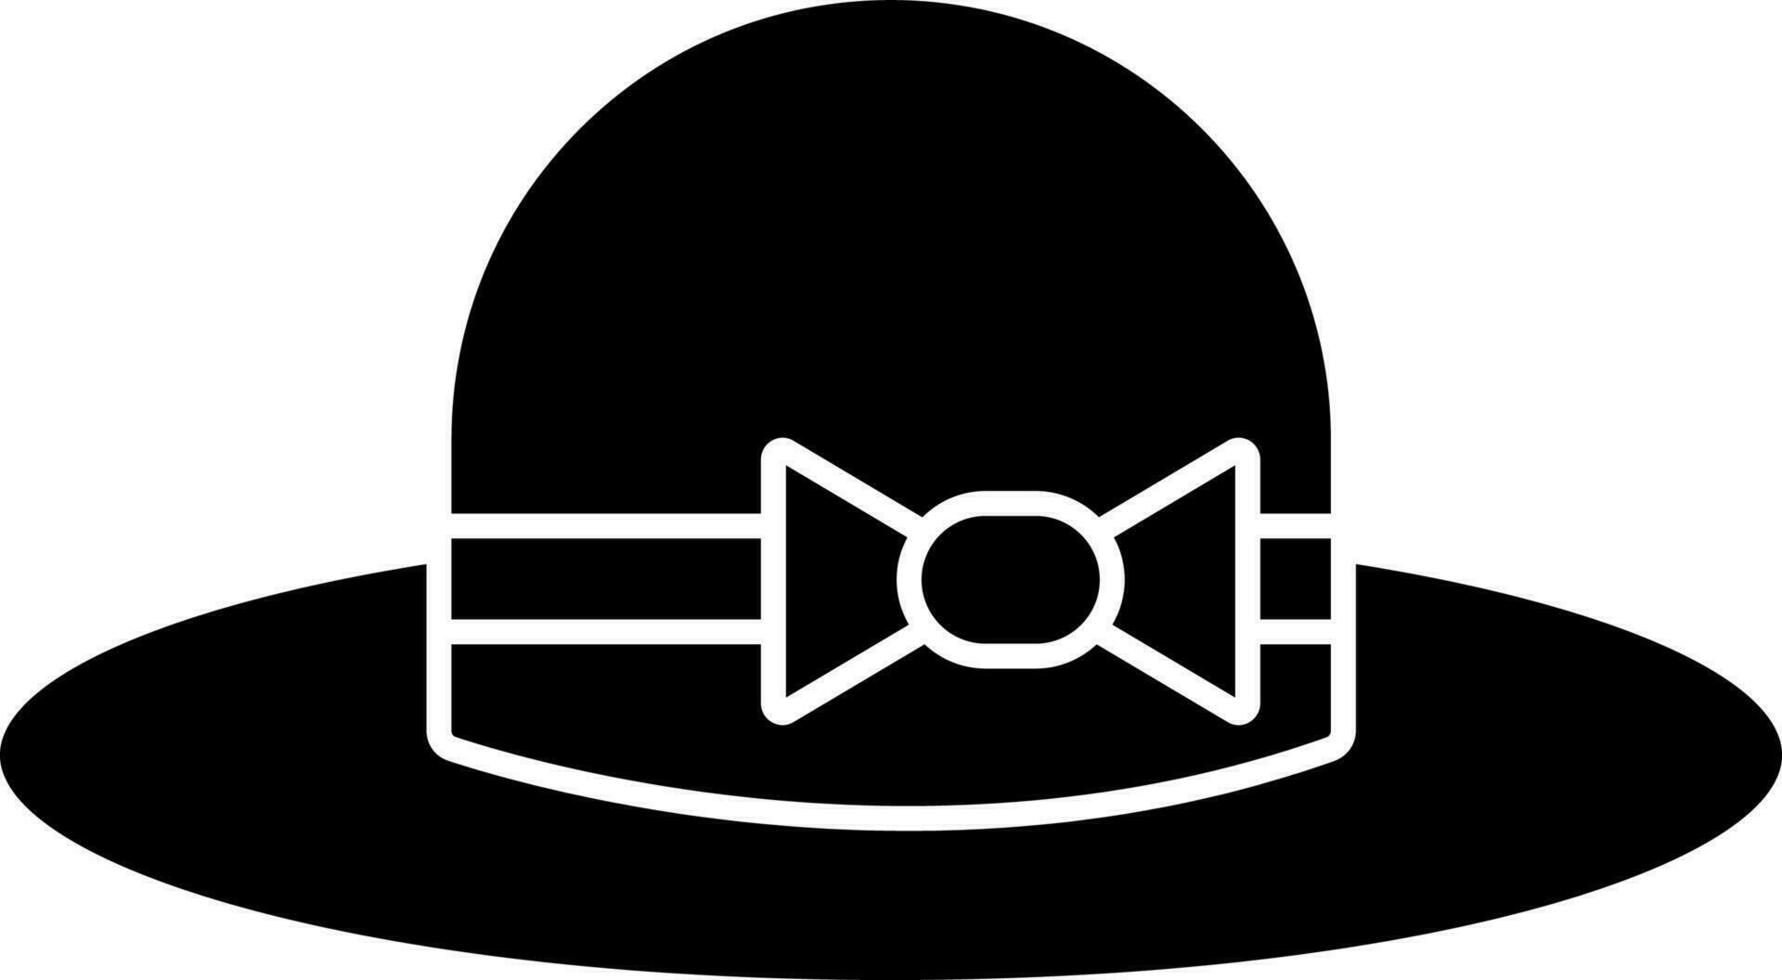 Female Hat Icon In Black And White Color. vector